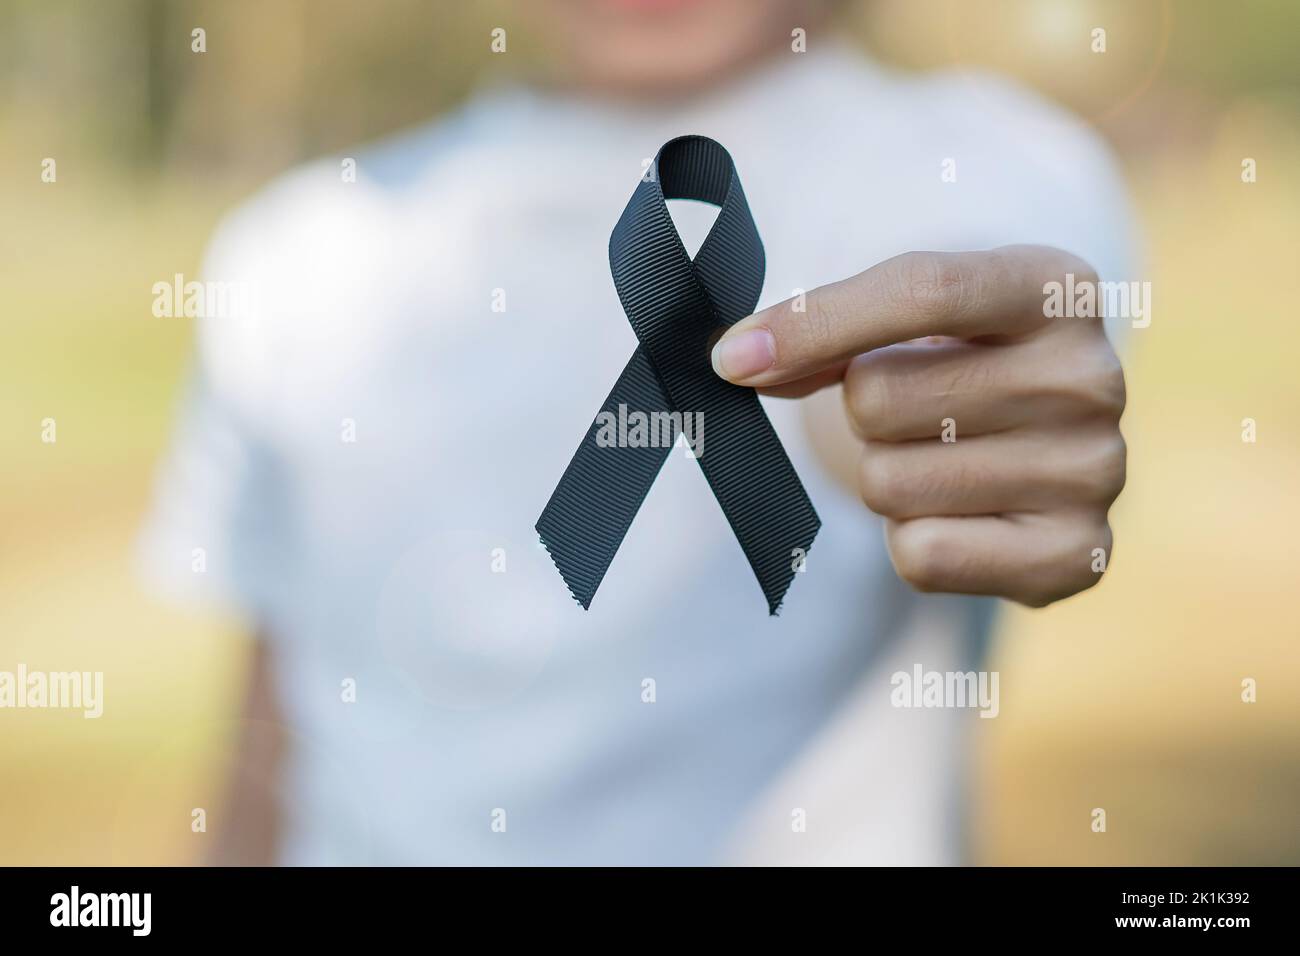 12 Rest in peace ideas  rest in peace, black ribbon, awareness